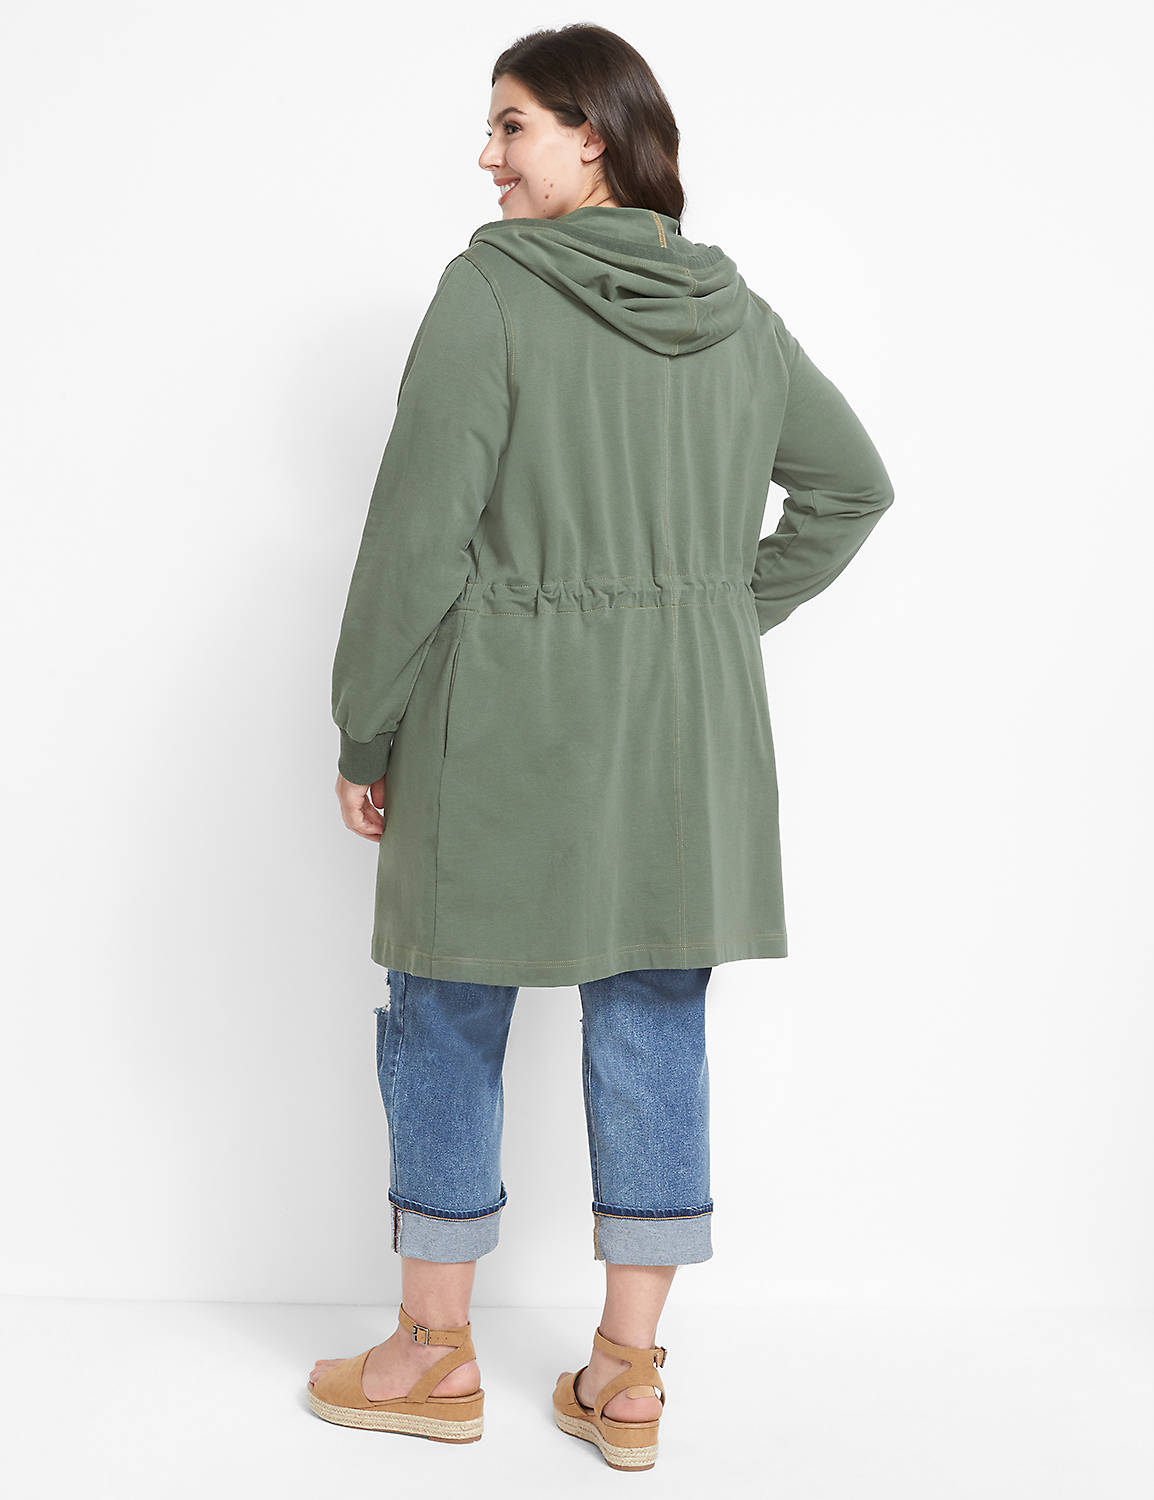 French Terry Casual Anorak 1125161 Product Image 2